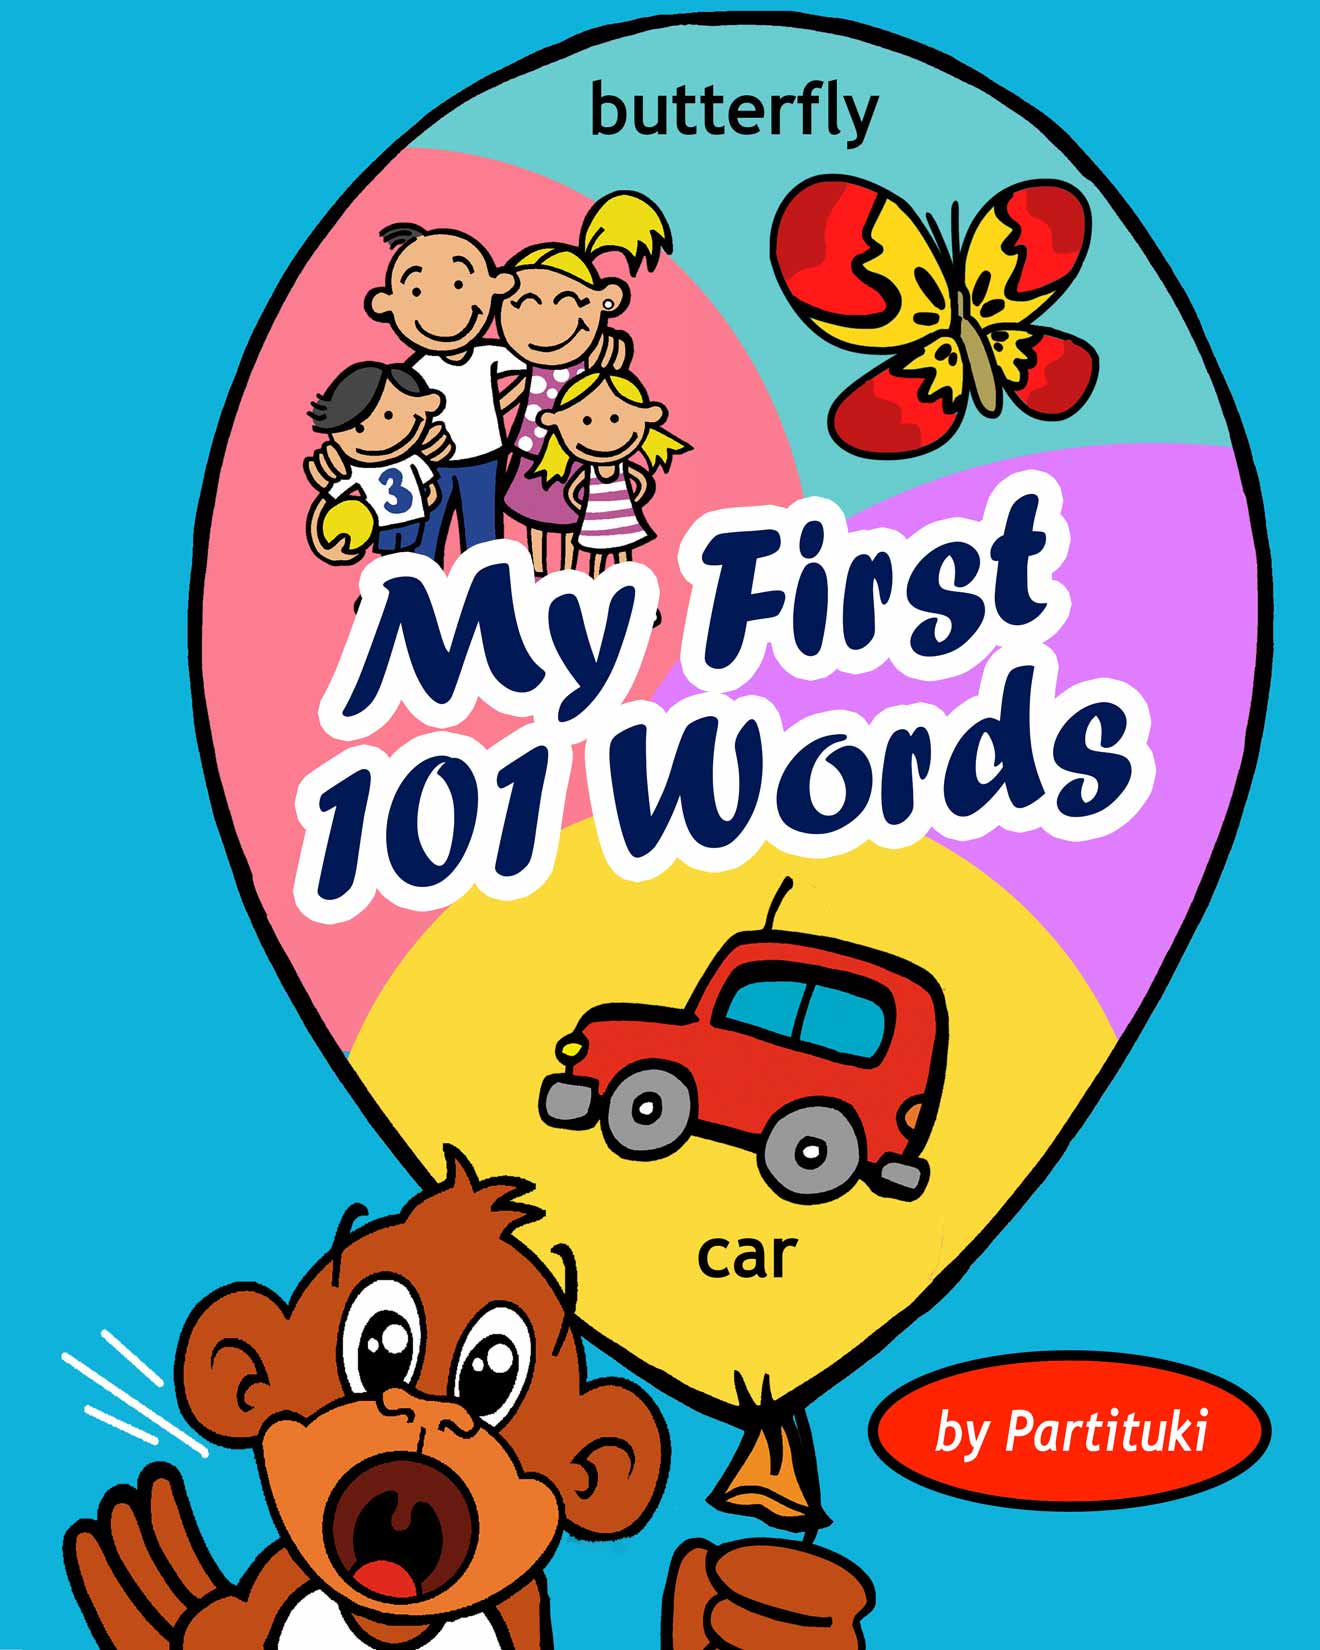 FREE: My First 101 Words by Partituki